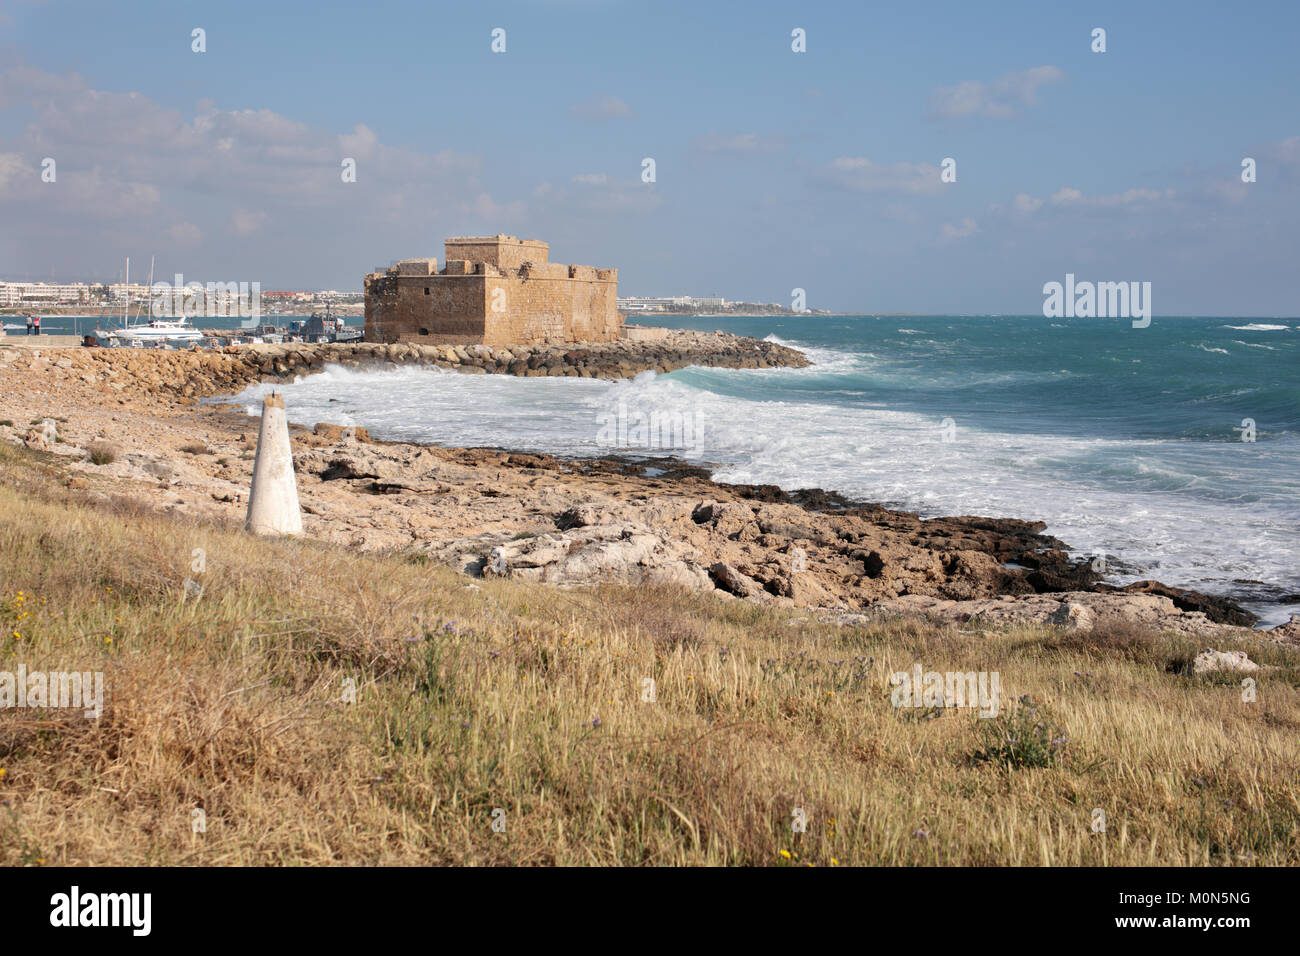 Paphos, Cyprus - March 16, 2016: View to the Paphos castle in a spring day. Medieval castle was declared a listed building in 1935 and represents one  Stock Photo